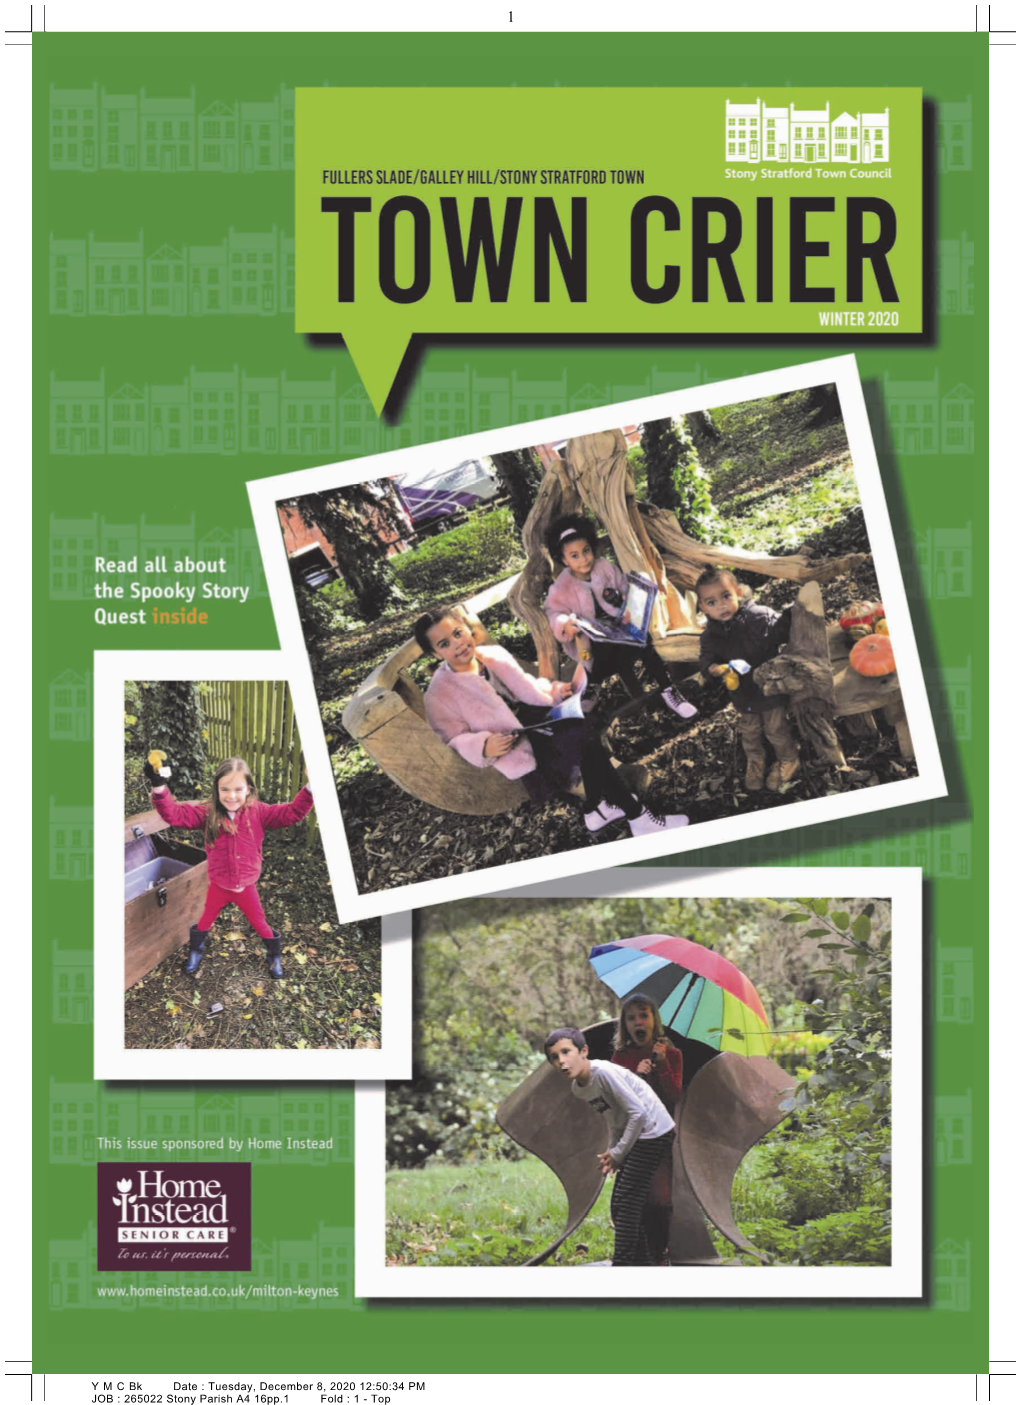 Town Crier and Website News